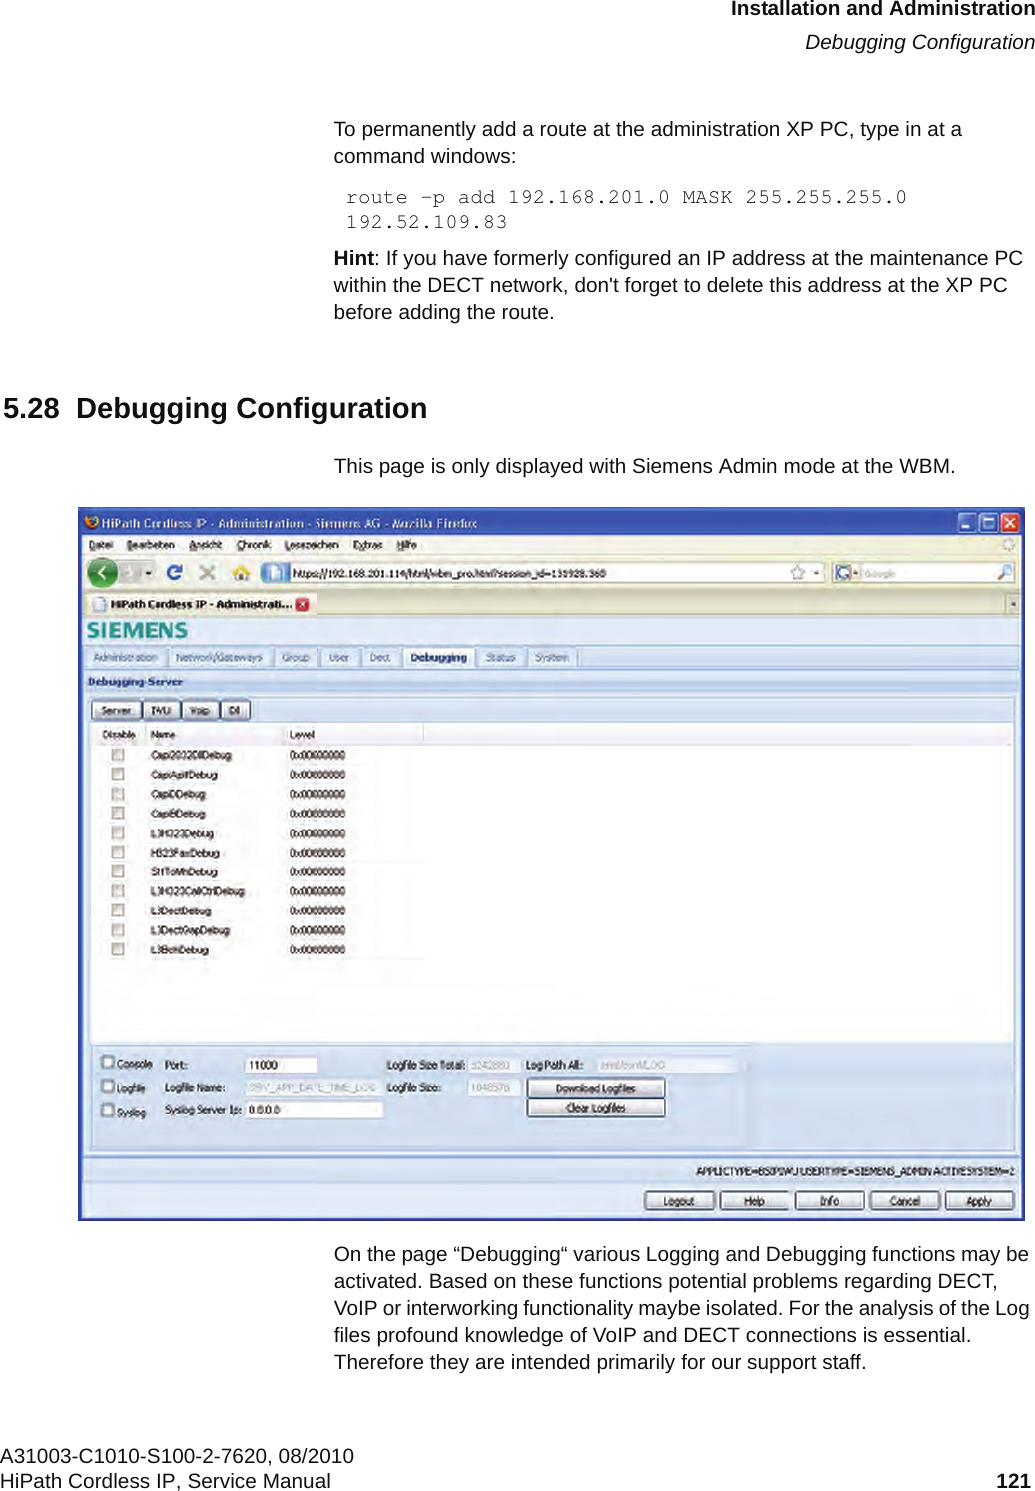 c05_ikon.fmInstallation and AdministrationDebugging ConfigurationA31003-C1010-S100-2-7620, 08/2010HiPath Cordless IP, Service Manual 121           To permanently add a route at the administration XP PC, type in at a command windows:route -p add 192.168.201.0 MASK 255.255.255.0 192.52.109.83Hint: If you have formerly configured an IP address at the maintenance PC within the DECT network, don&apos;t forget to delete this address at the XP PC before adding the route.5.28  Debugging ConfigurationThis page is only displayed with Siemens Admin mode at the WBM.On the page “Debugging“ various Logging and Debugging functions may be activated. Based on these functions potential problems regarding DECT, VoIP or interworking functionality maybe isolated. For the analysis of the Log files profound knowledge of VoIP and DECT connections is essential. Therefore they are intended primarily for our support staff.